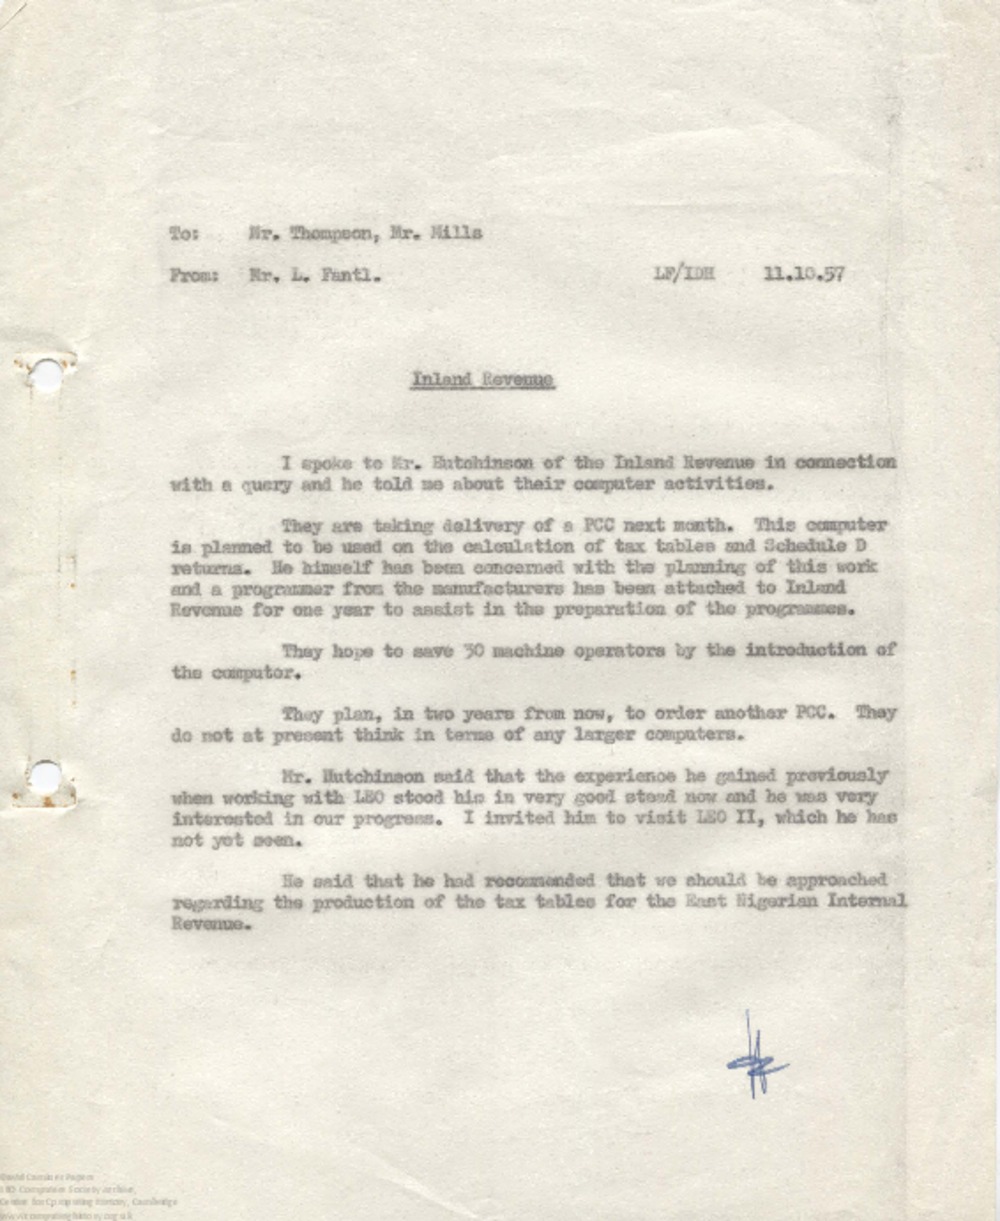 Article: 62951 Memo regarding Inland Revenue running Tax Tables on their own computer, 11th Oct 1957